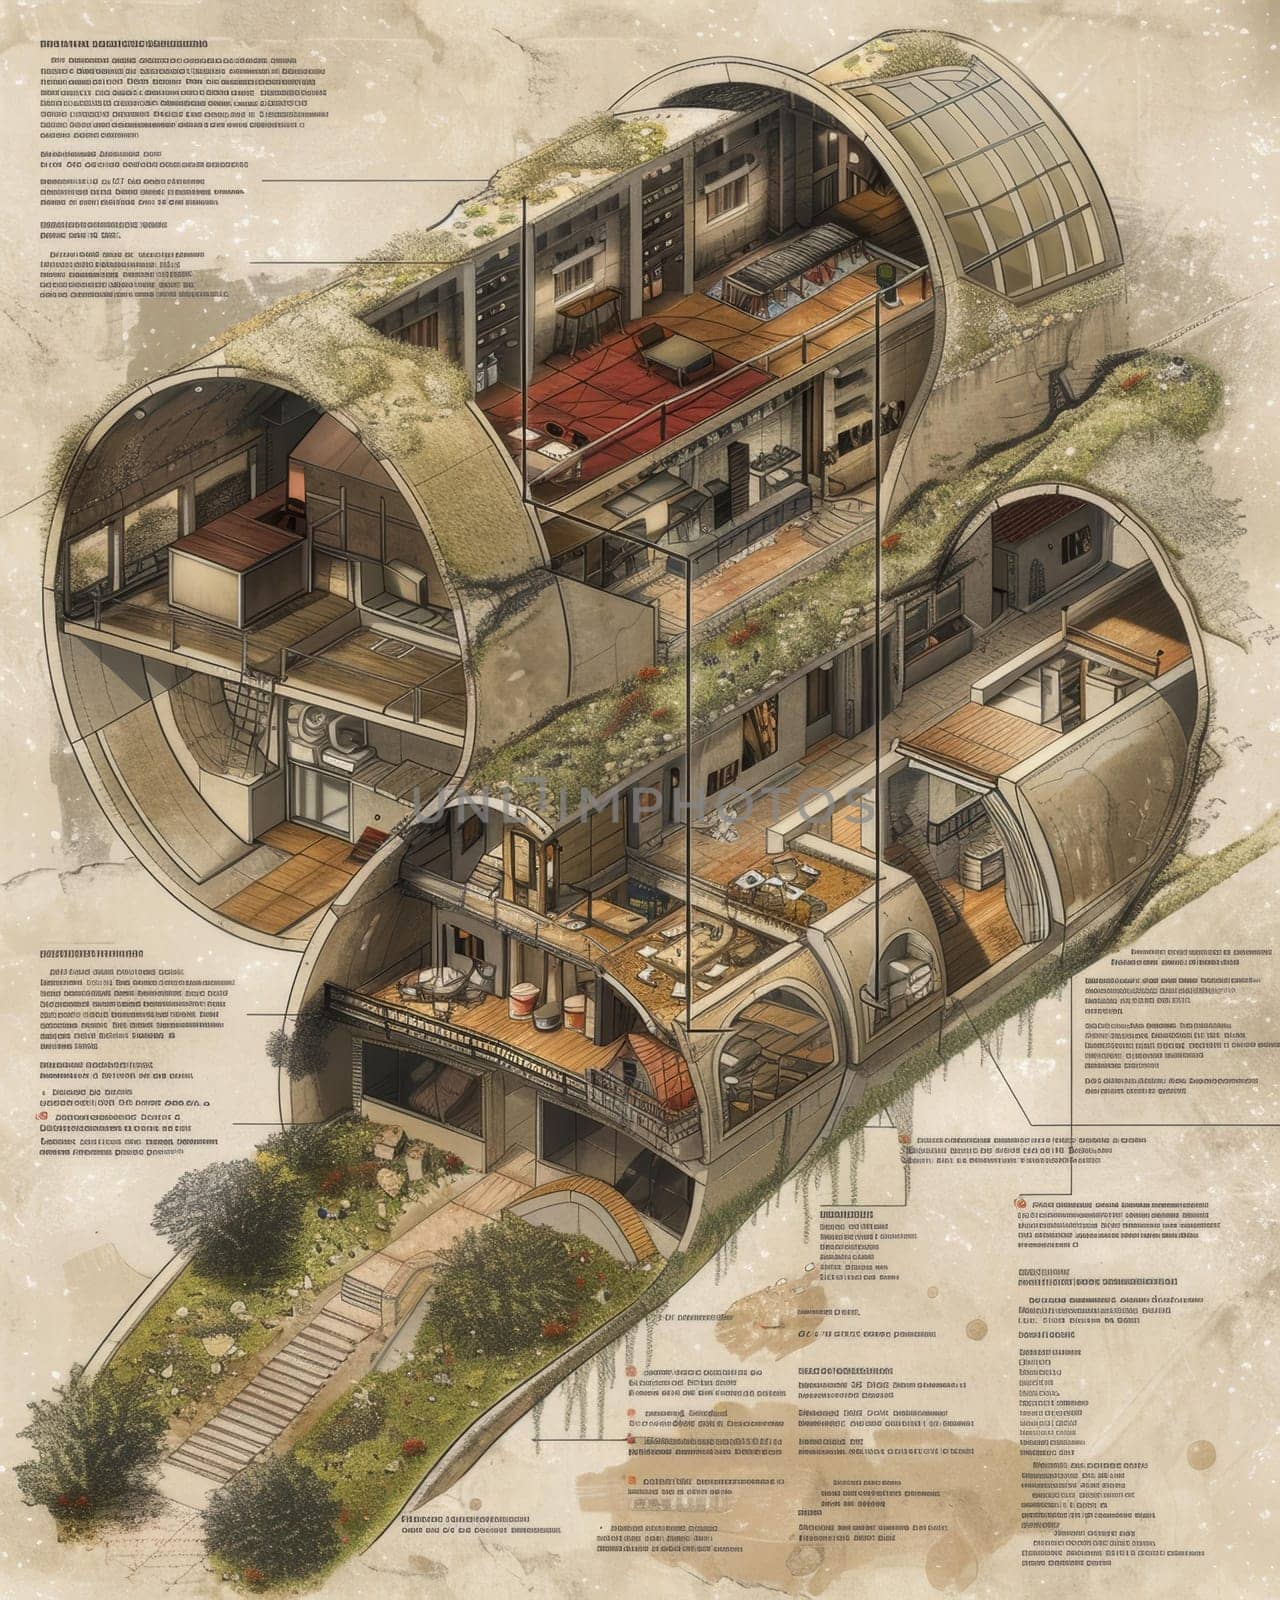 A vintage-style cross-section depicting an ecologically designed earthship with lush green roofing and multiple sustainable living spaces. by sfinks